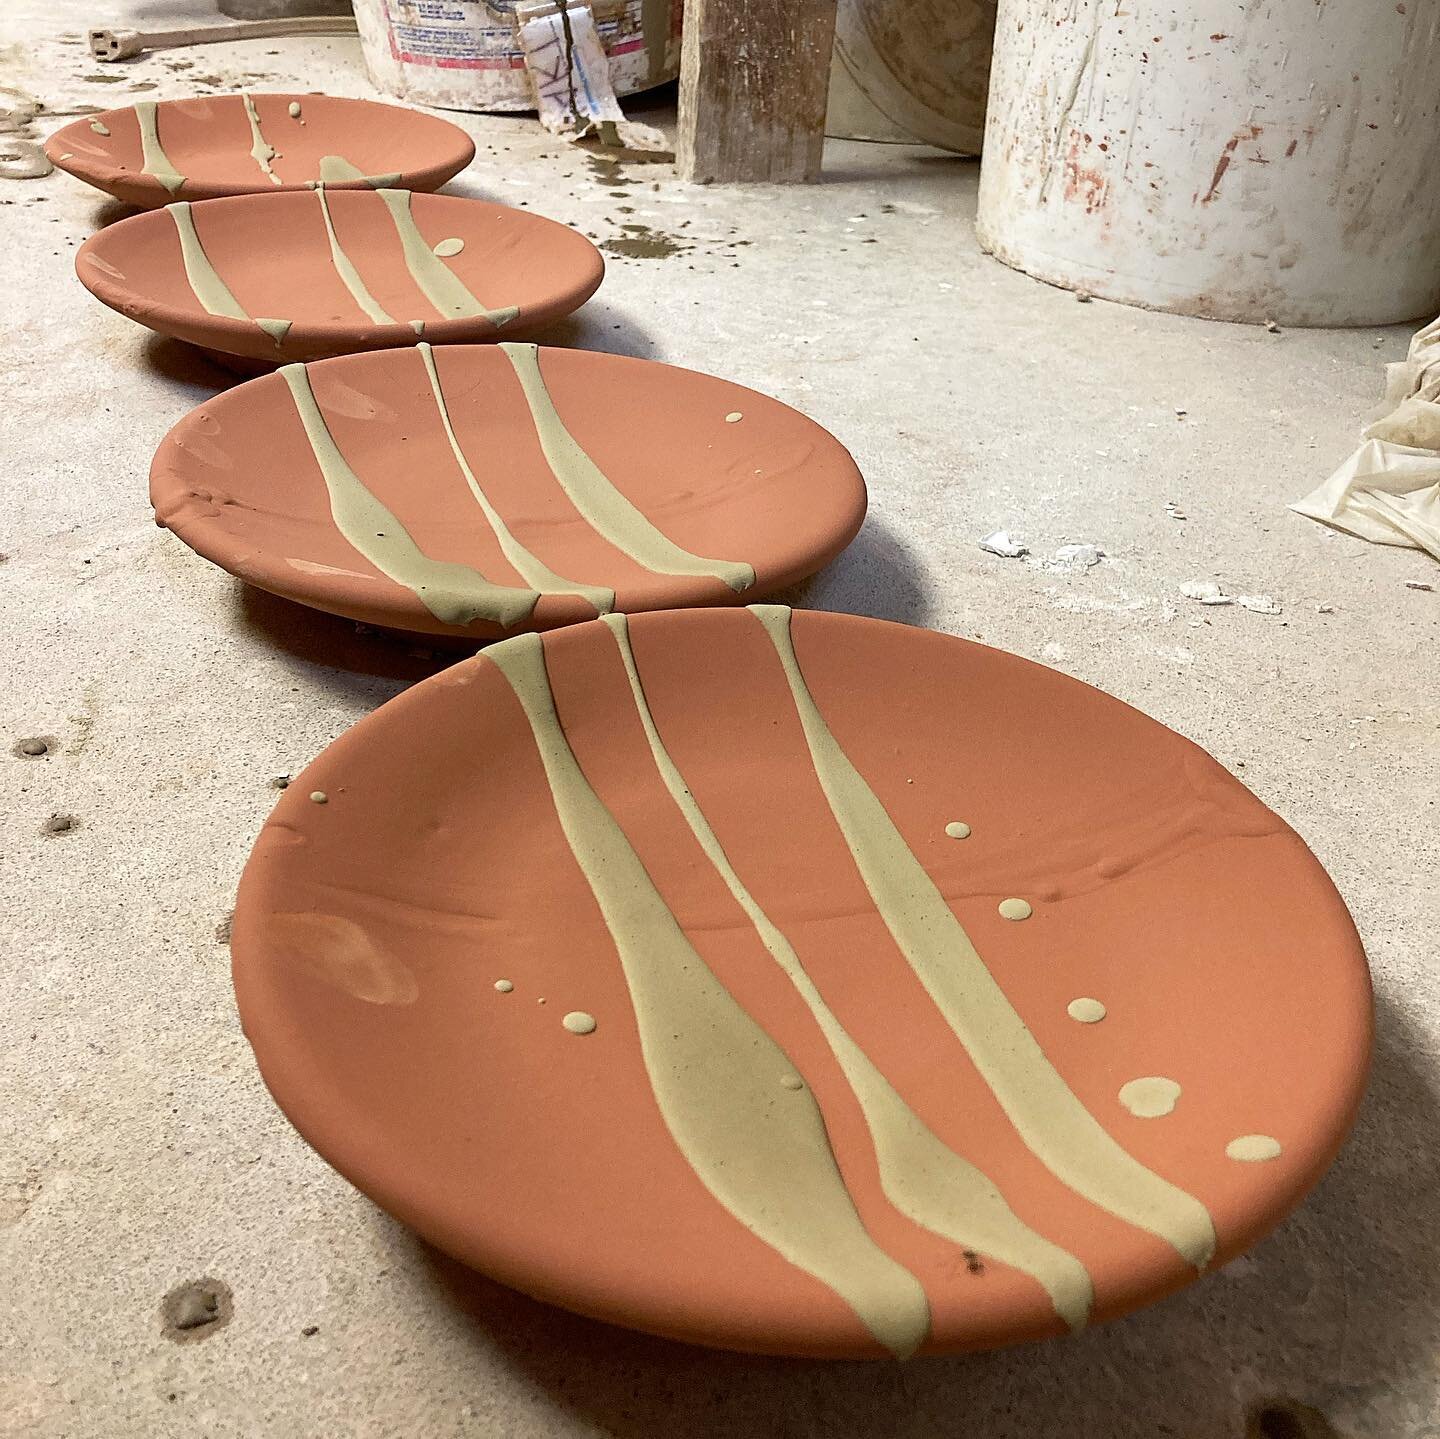 Glazing plates for the @rivervalleypotters sale September 16-18! I&rsquo;ll be a guest at @guillermopottery and @alanacuellar&rsquo;s studio along with @mikenorman90, @lindachristiansonpottery, @art_andes, @karinkraemer3239, and @peterpaulpottery! Br